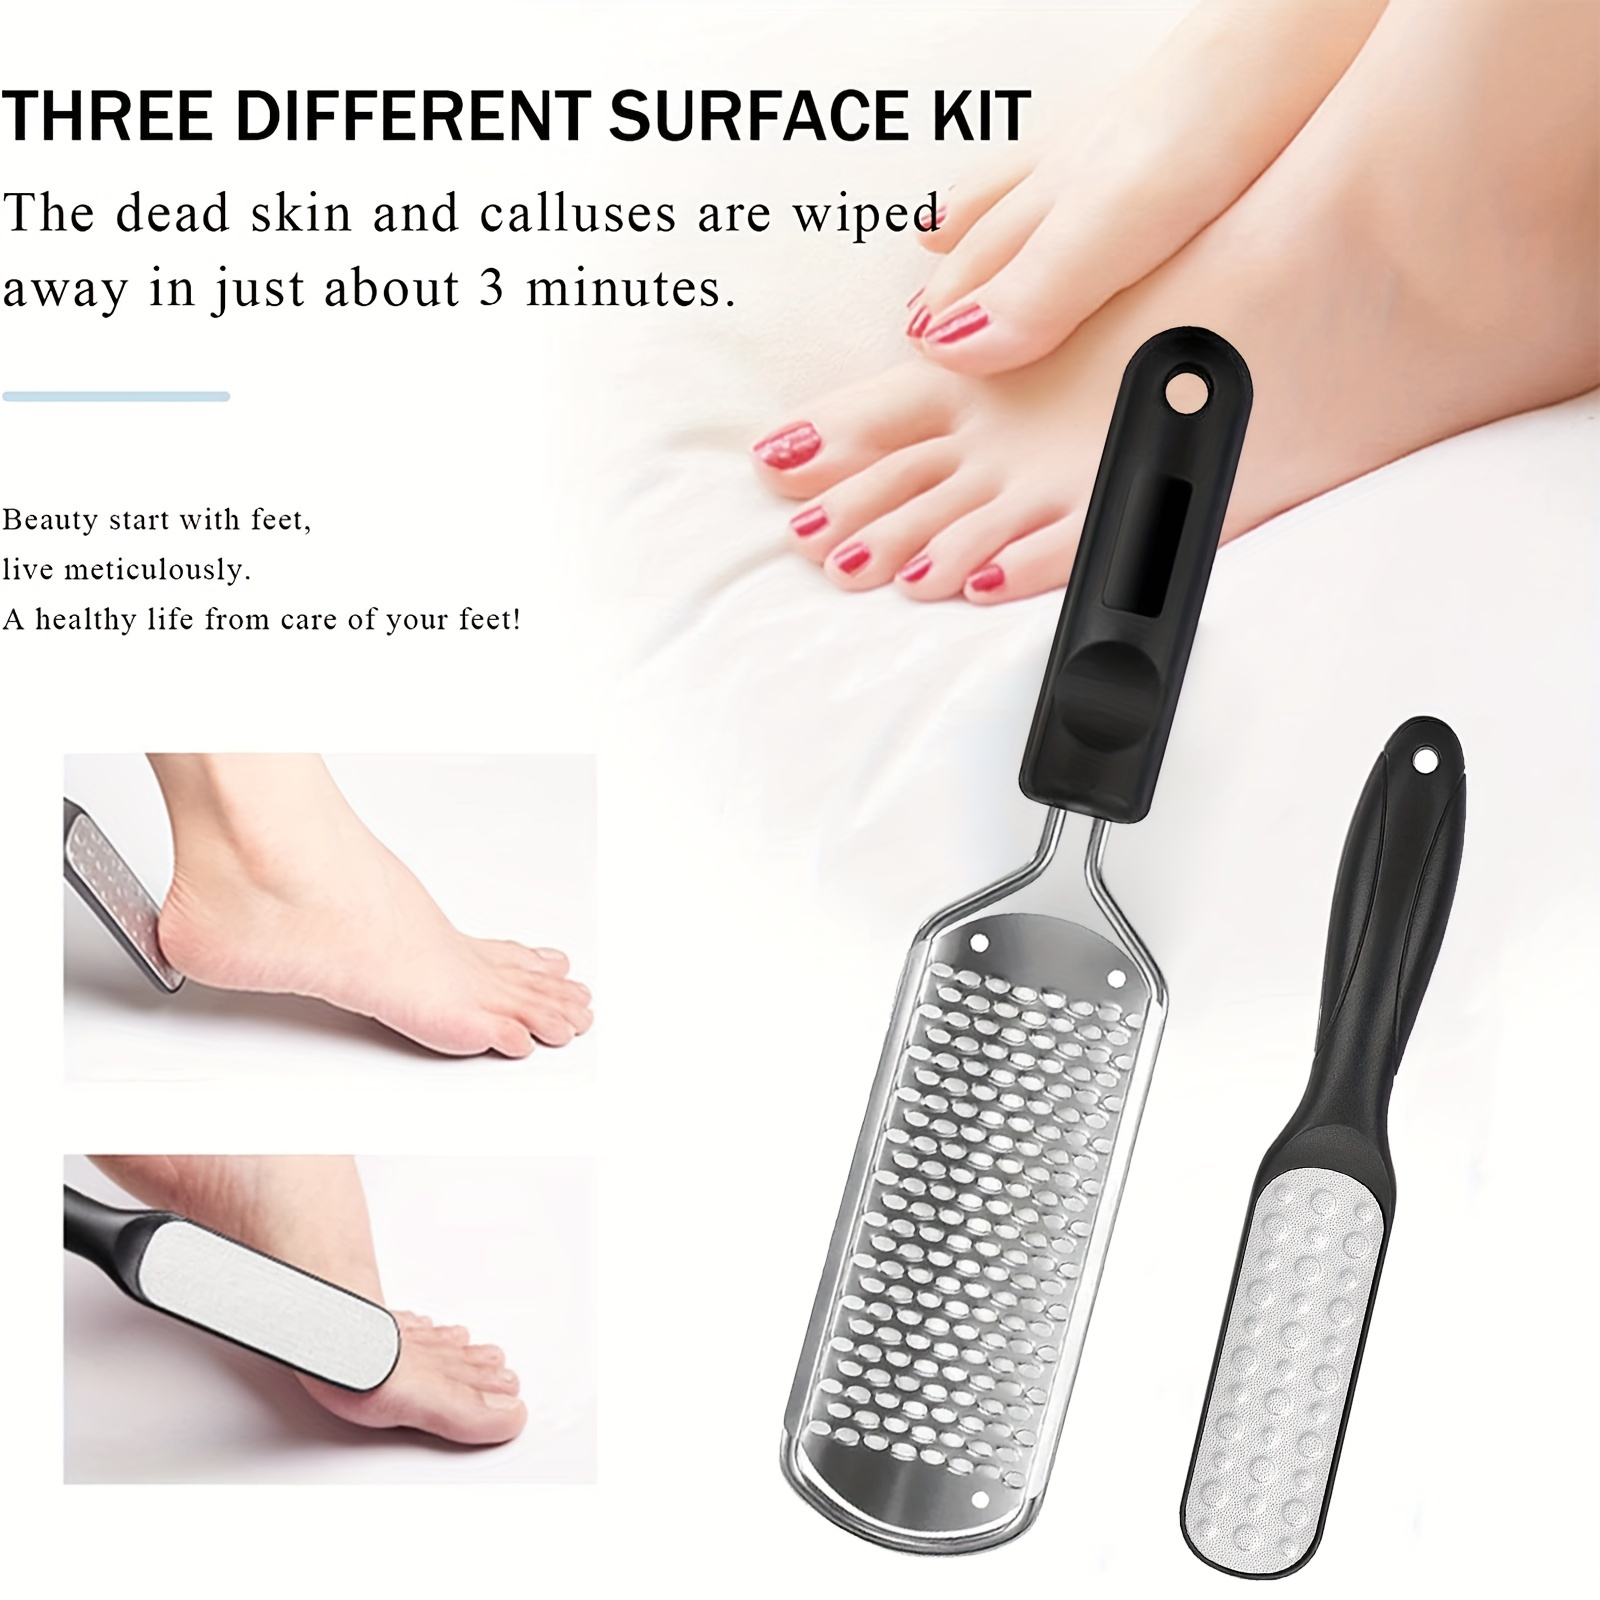 Colossal Foot Rasp Foot File and Callus Remover - 1 or 2 Pack